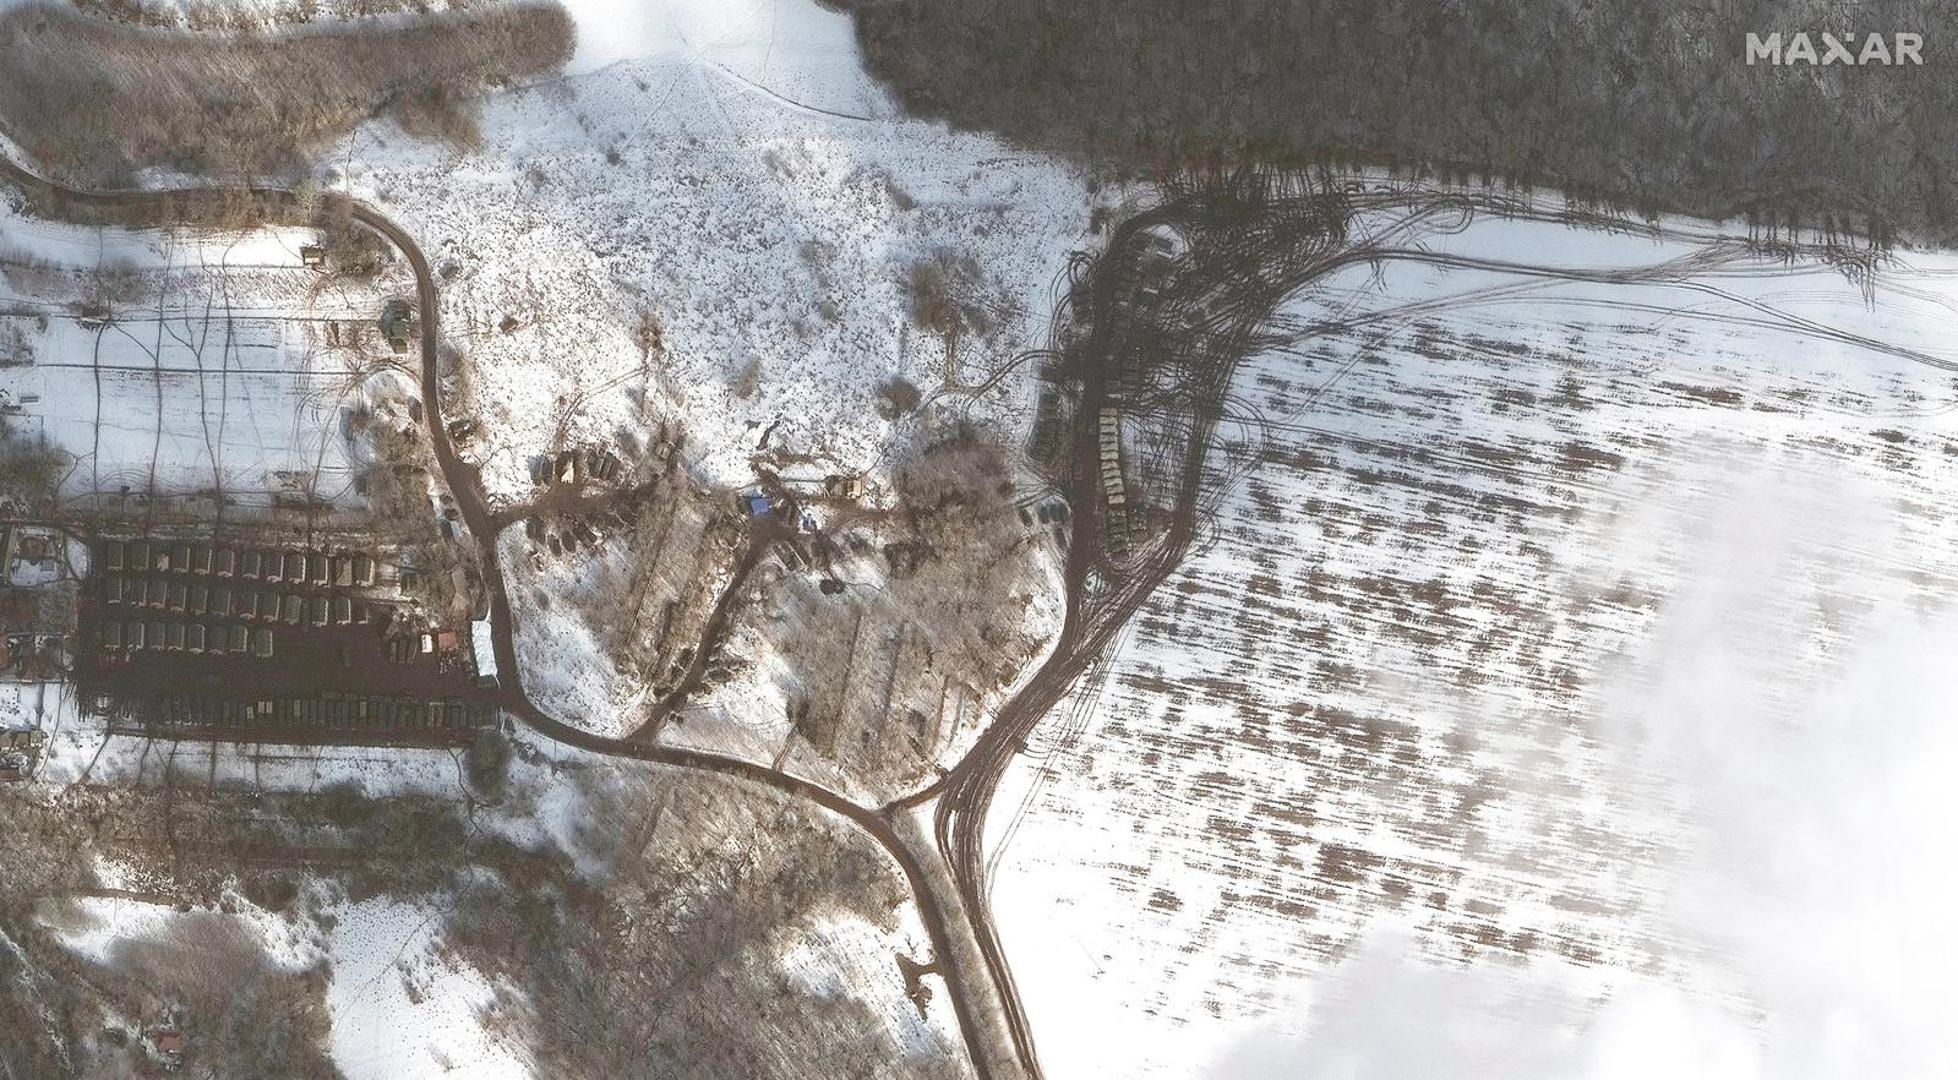 A satellite image shows a battle group deployment, near Belgorod, Russia February 20, 2022. Maxar Technologies/Handout via REUTERS ATTENTION EDITORS - THIS IMAGE HAS BEEN SUPPLIED BY A THIRD PARTY. NO RESALES. NO ARCHIVES. MANDATORY CREDIT. DO NOT OBSCURE LOGO Photo: MAXAR TECHNOLOGIES/REUTERS